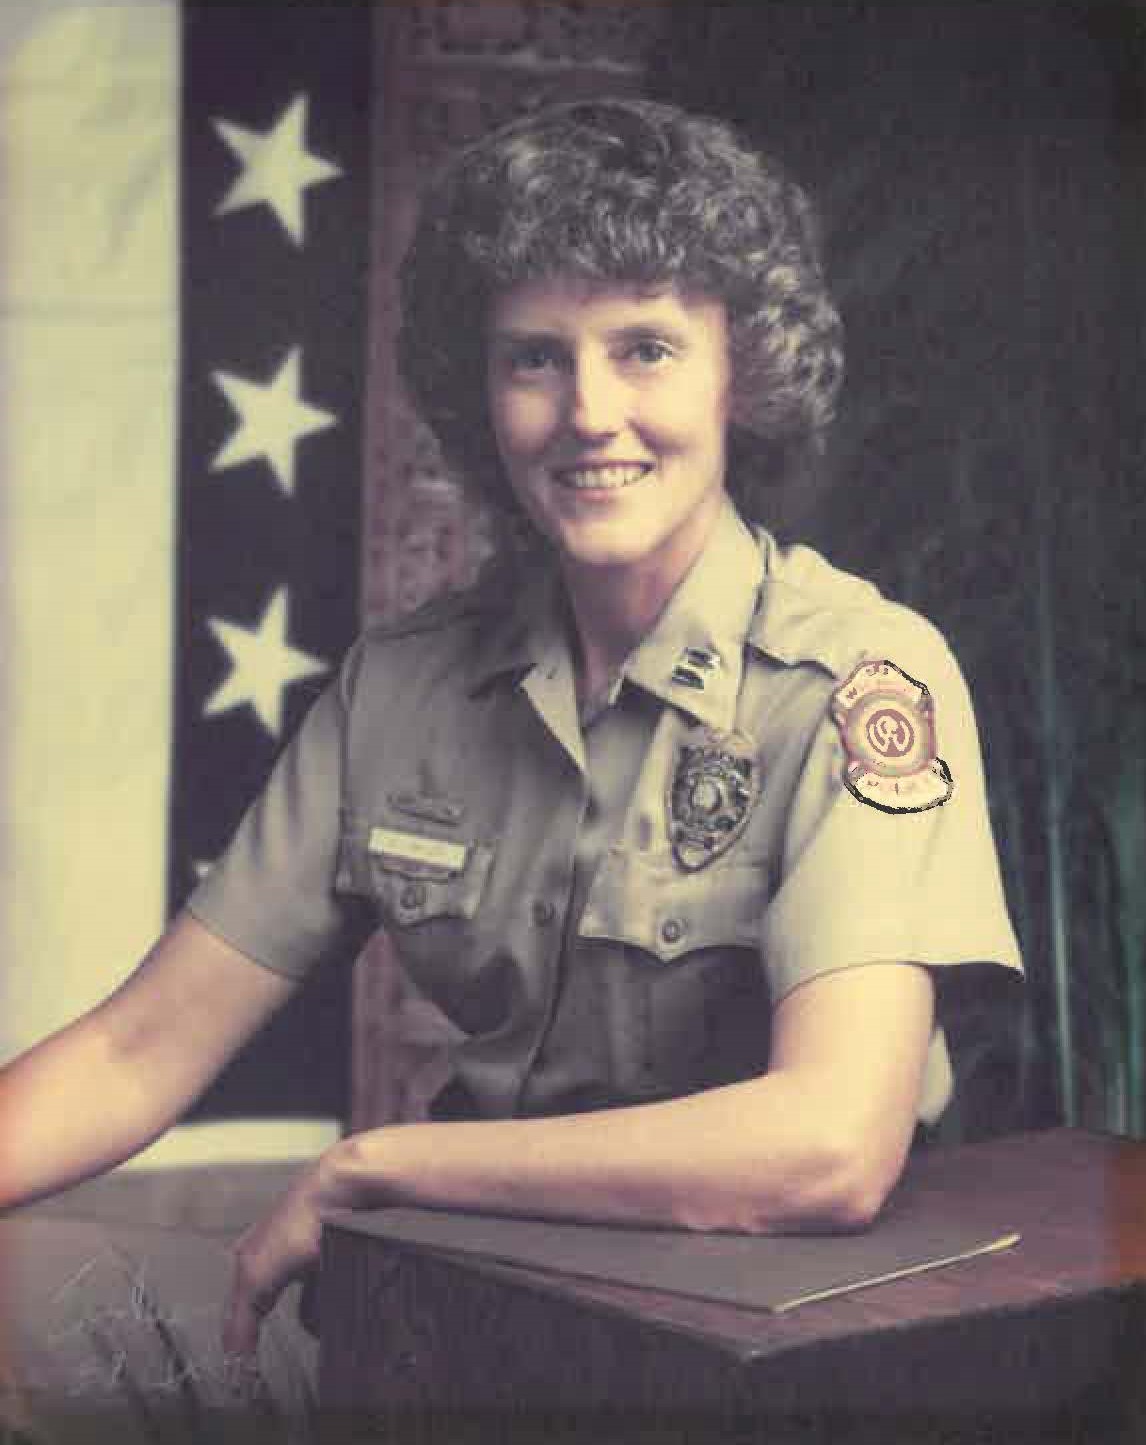 By the time of this photograph in 1989, Beckie Miller had risen in the ranks to captain with the Wichita Police Department.